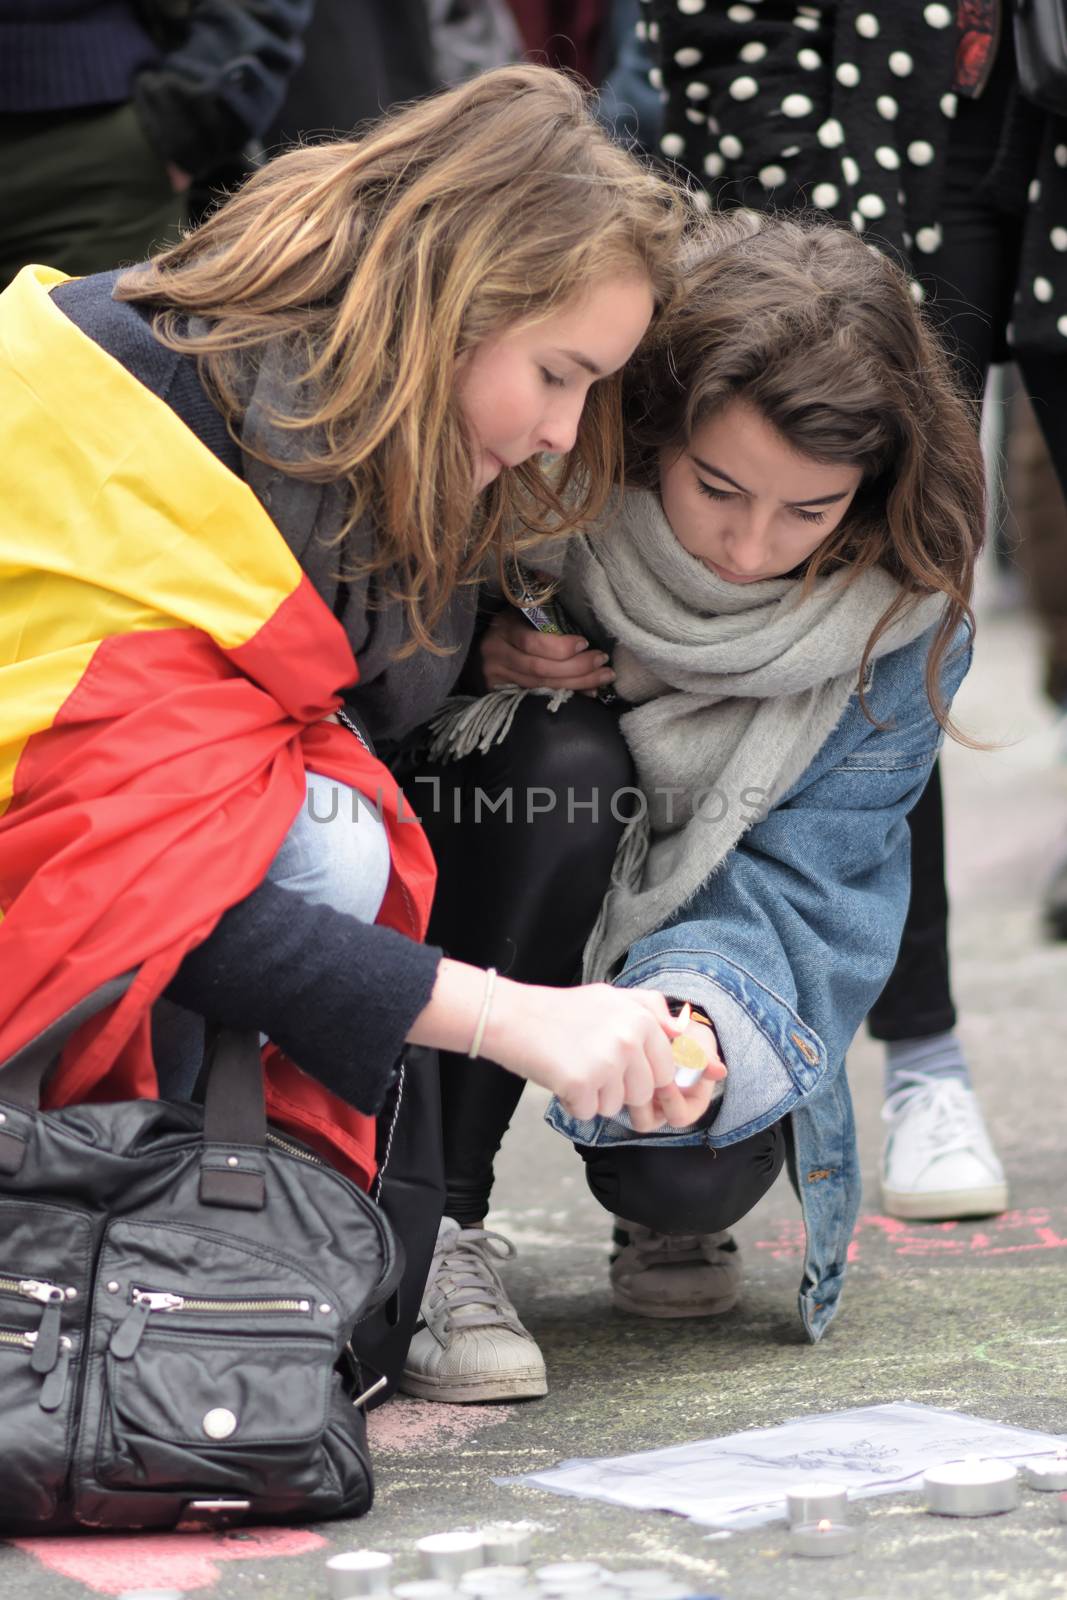 BELGIUM, Brussels: Two girls light a candle as people gather to to pay tribute to the victims of the Brussels airport and metro bombings, on the Place de la Bourse in central Brussels, on March 23, 2016, a day after the triple blasts killed at least 31 people and left around 250 injured. World leaders united in condemning the carnage in Brussels and vowed to combat terrorism, after Islamic State bombers killed around 35 people in a strike at the symbolic heart of the EU.